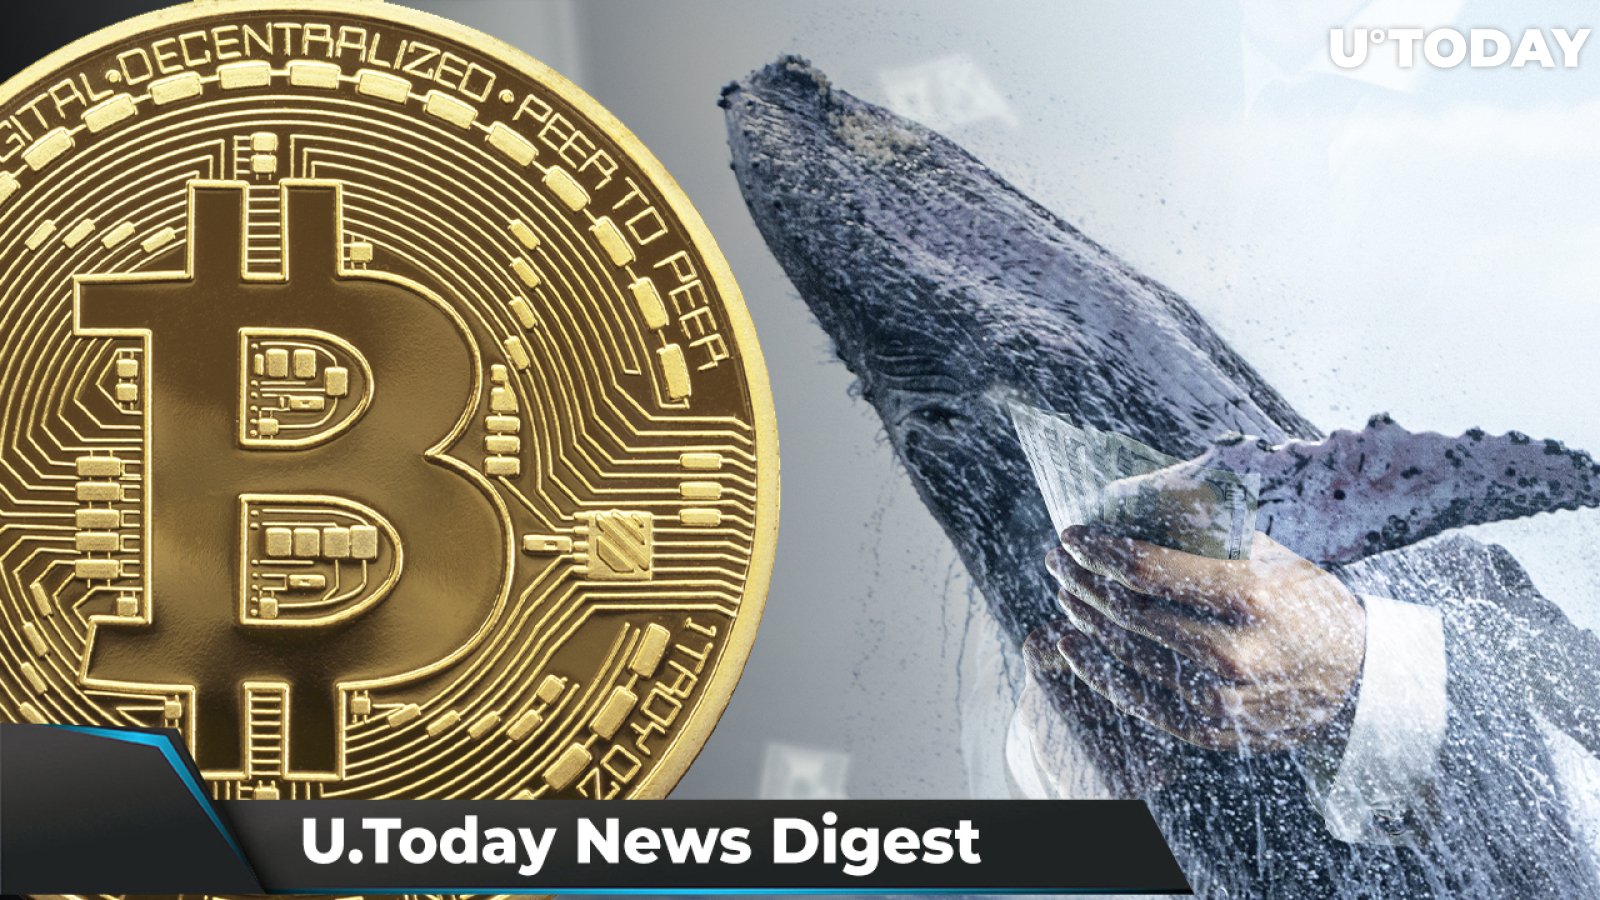 BTC, ETH, SOL Tumble, SHIB Flips FTX by USD Value Among Top ETH Whales, $100 Million Worth of Crypto Liquidated: Crypto News Digest by U.Today